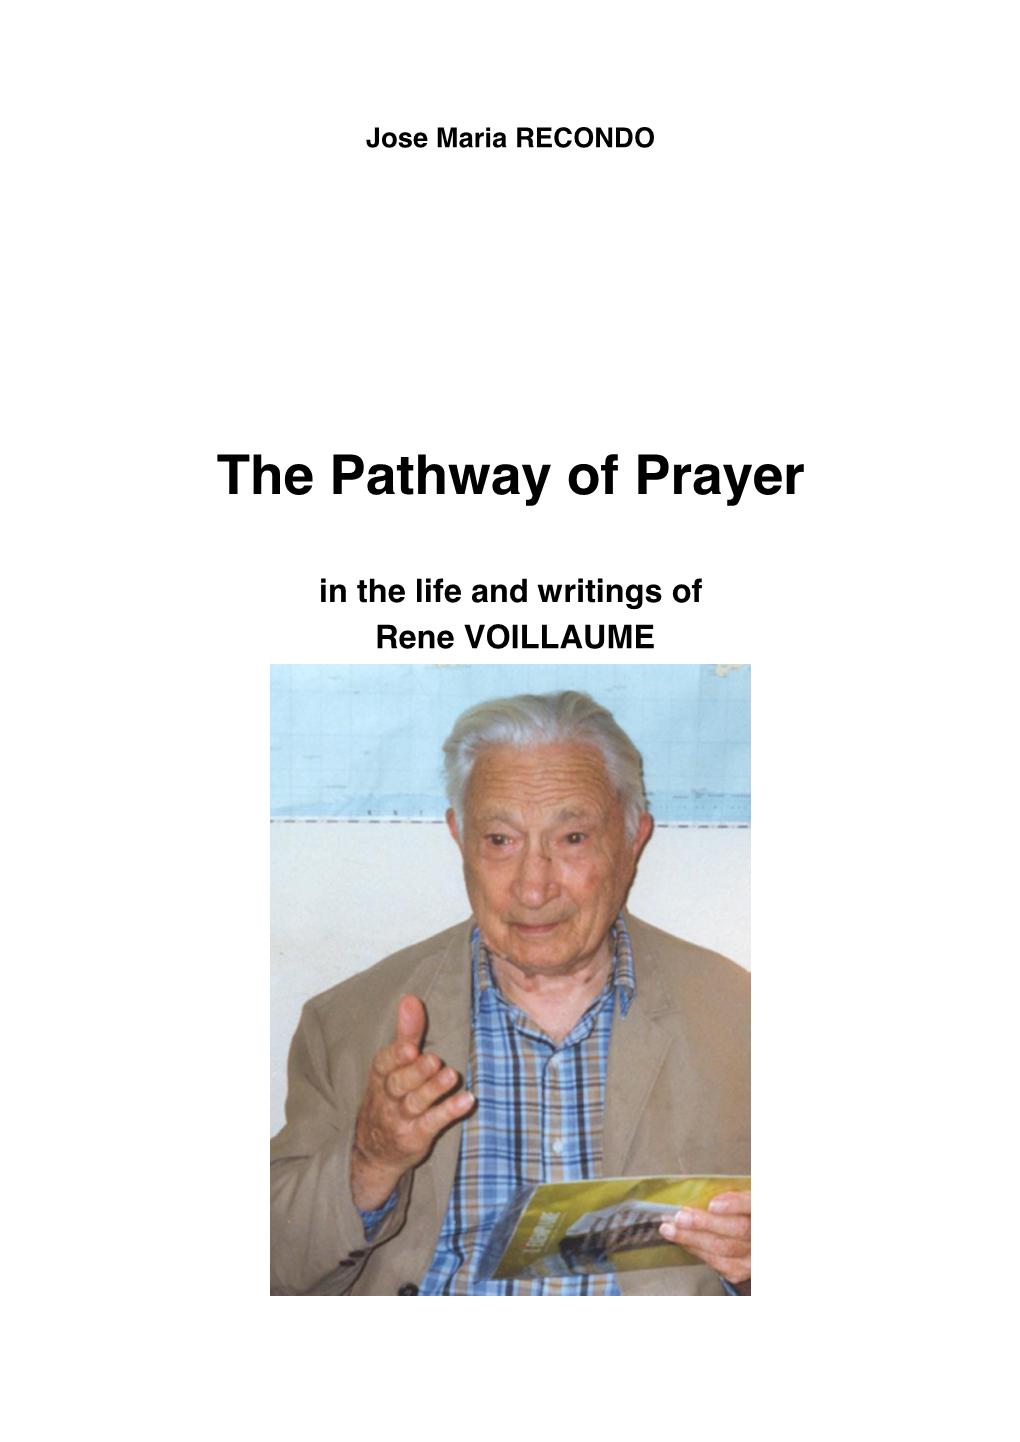 The Pathway of Prayer in the Life and Writings of Rene VOILLAUME, By